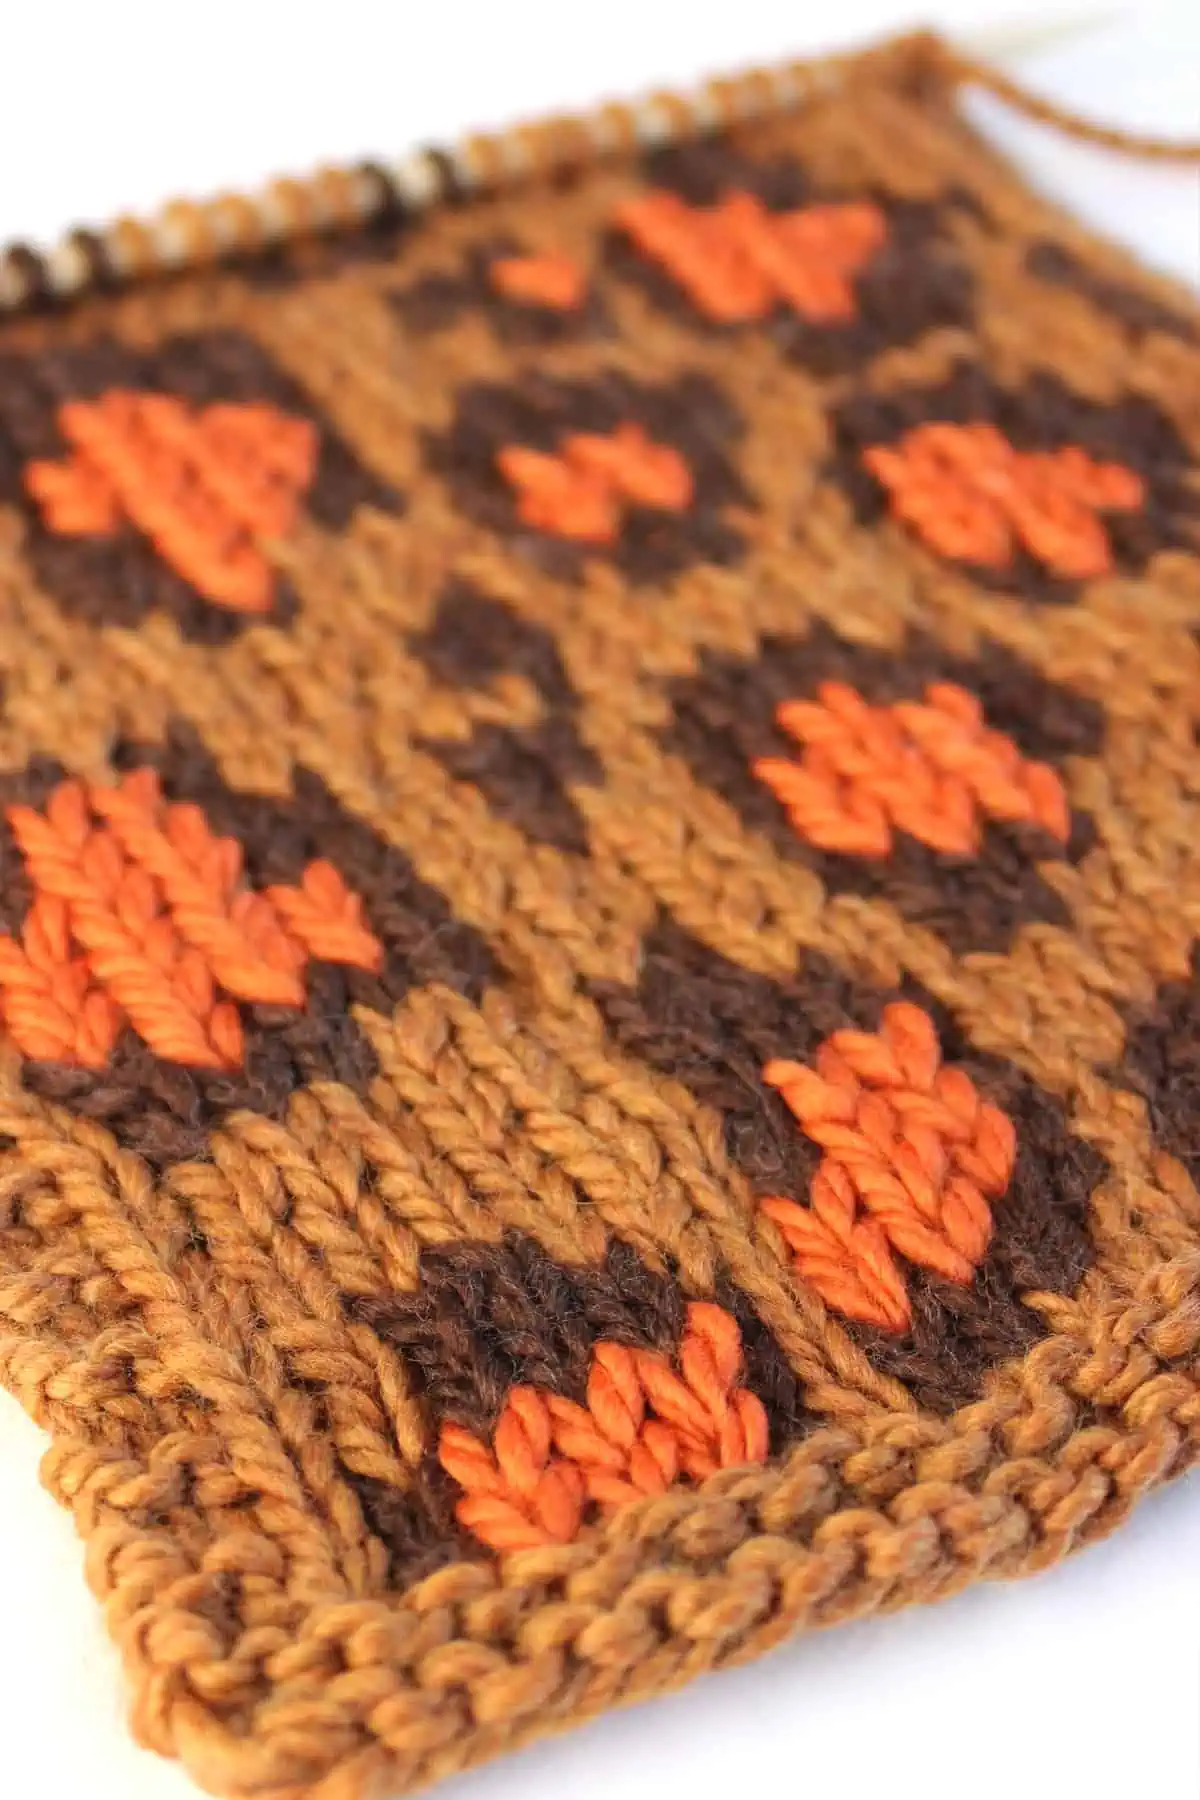 Close-up swatch of the Leopard Print knit stitch pattern in tan, dark brown, and orange colored yarn on a knitting needle.